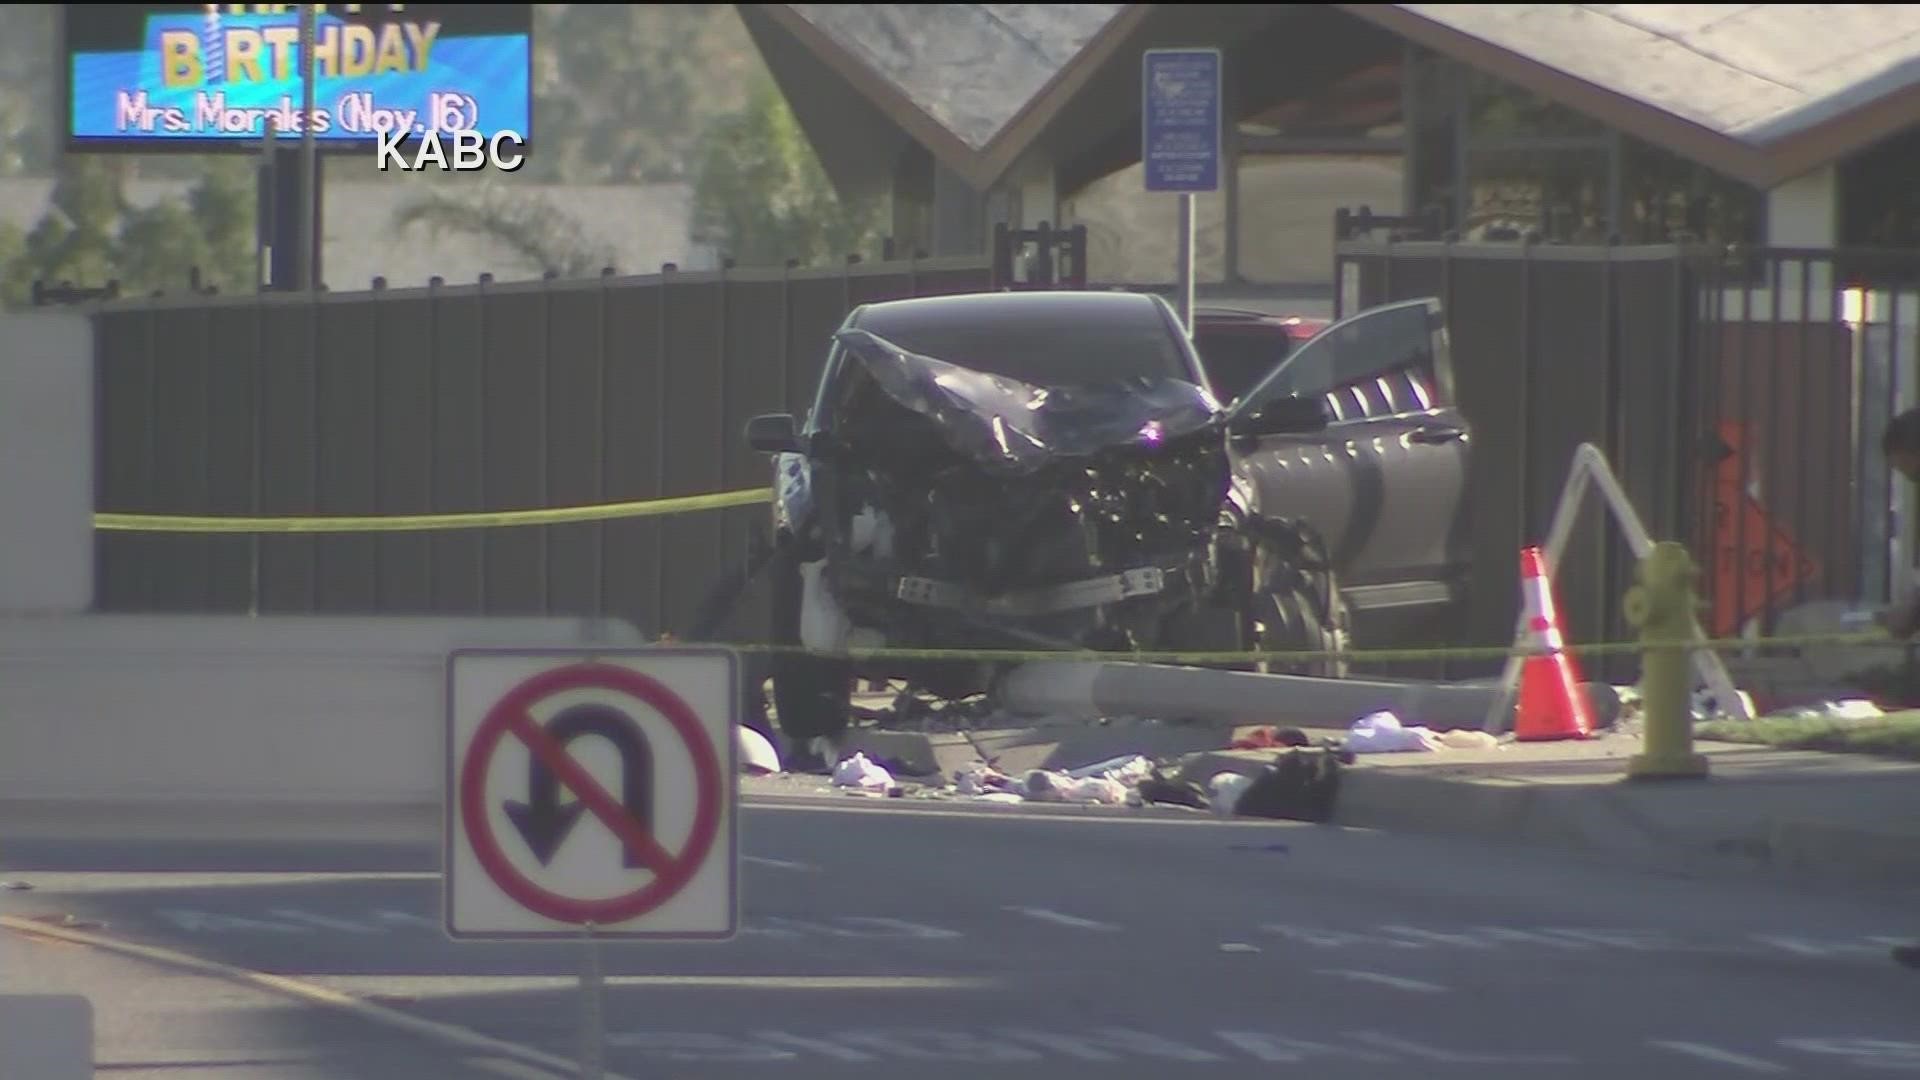 The crash occurred around dawn Wednesday in suburban Whittier. A Sheriff's Department statement says the recruits are part of an academy class.